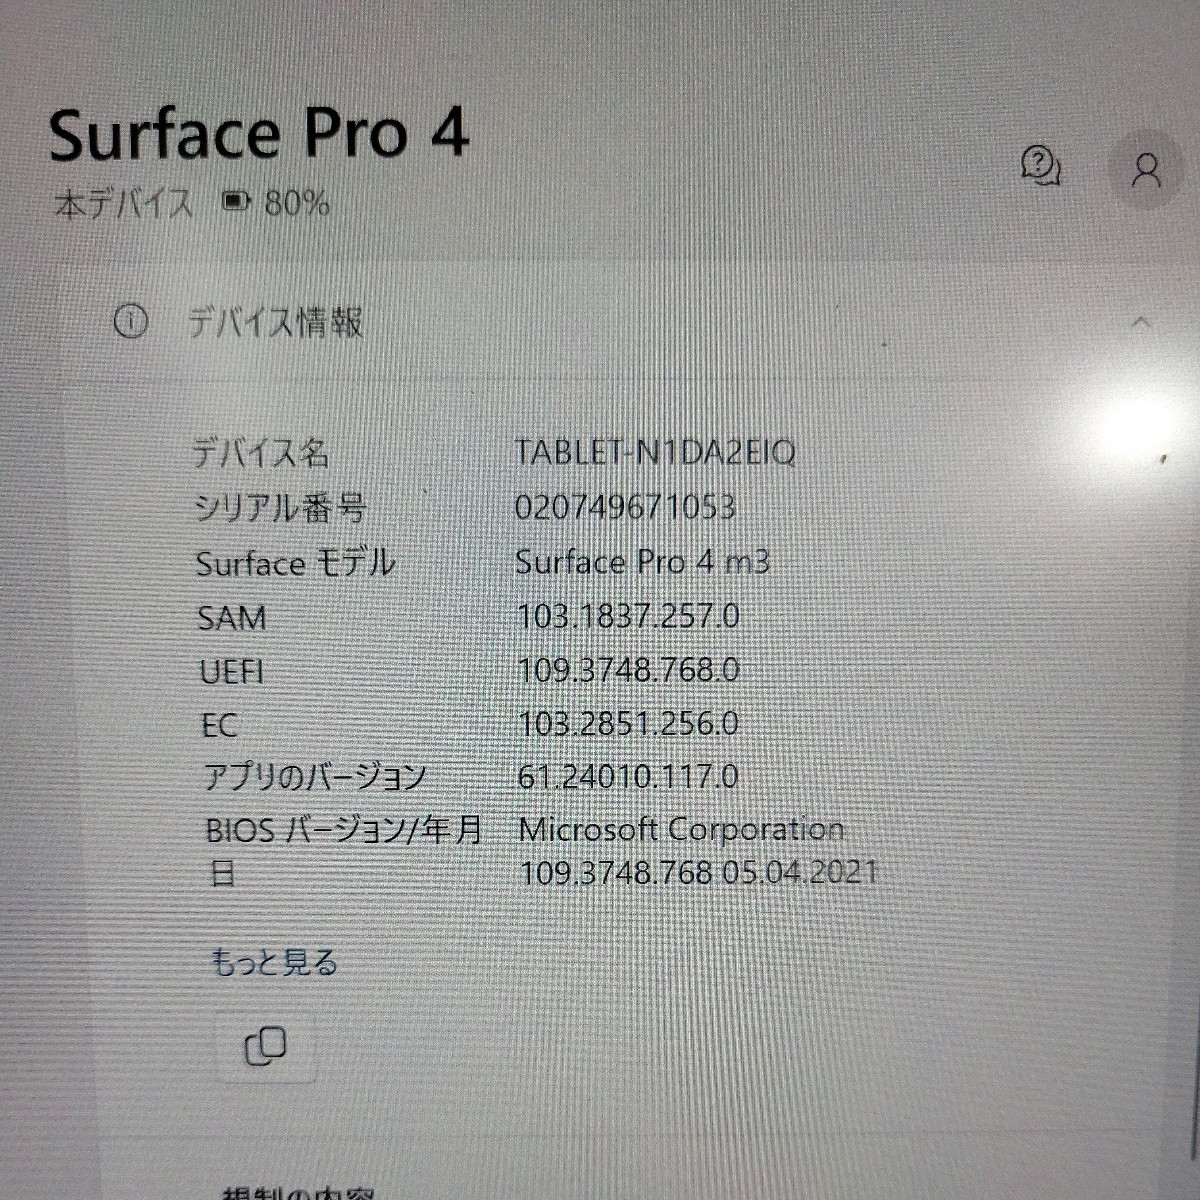 Microsoft Surface Pro 5 ,Pro 4 まとめ売りジャンク 3台 管理番号 2402129_画像4